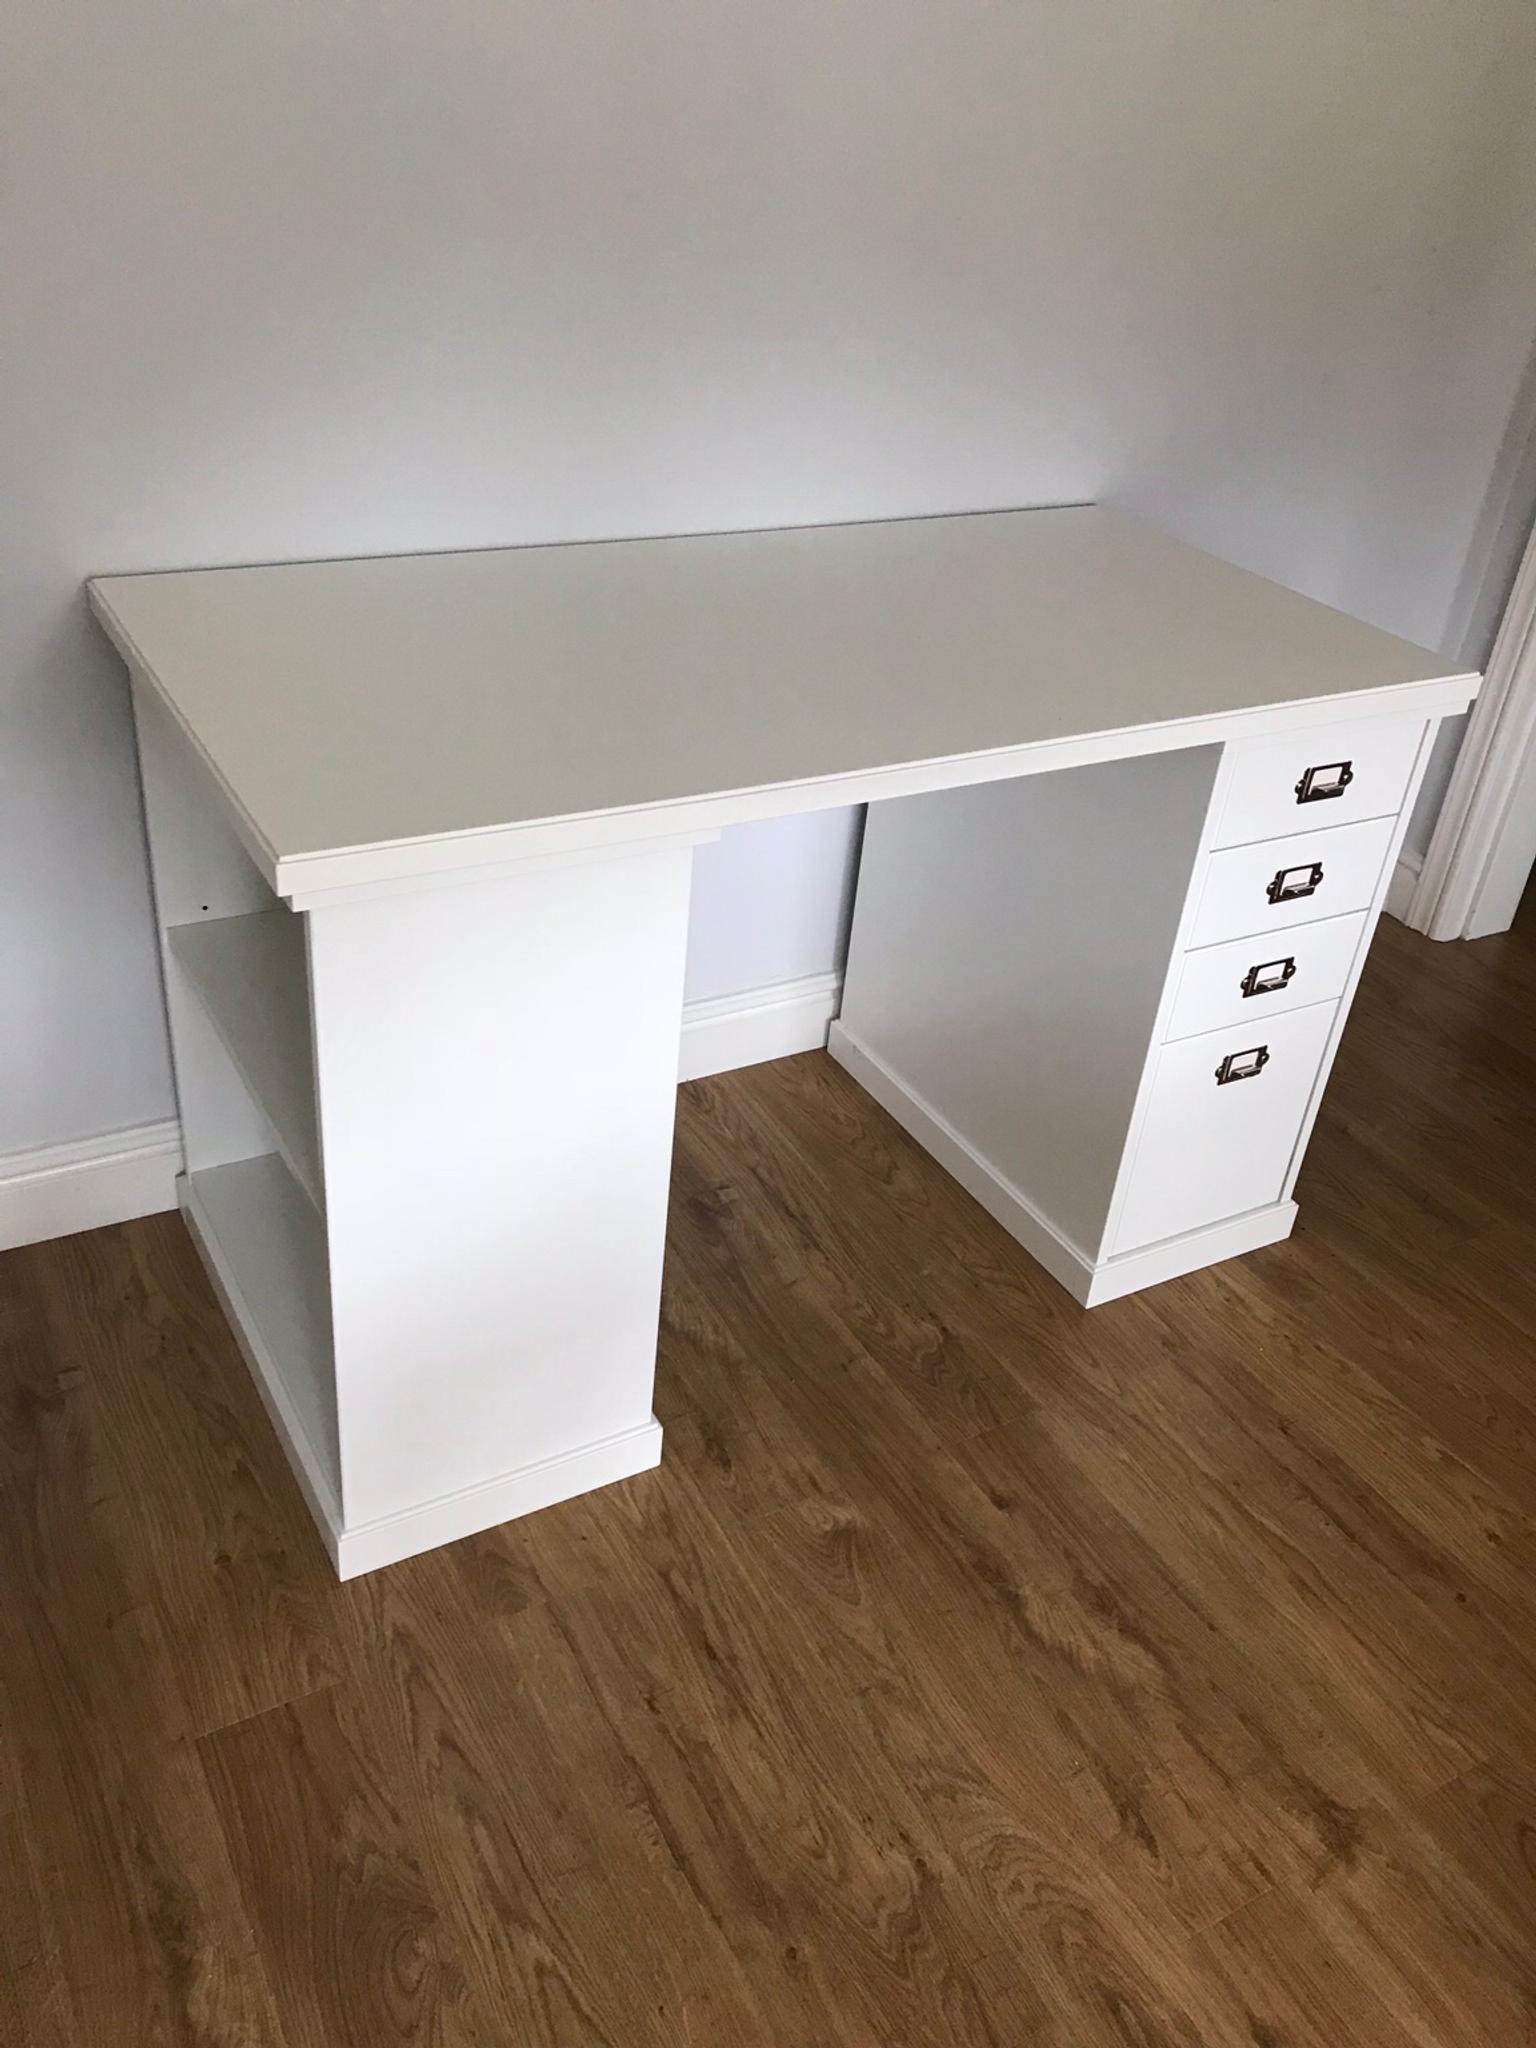 Ikea Klimpen Table Desk White In L14 Knowsley For 90 00 For Sale